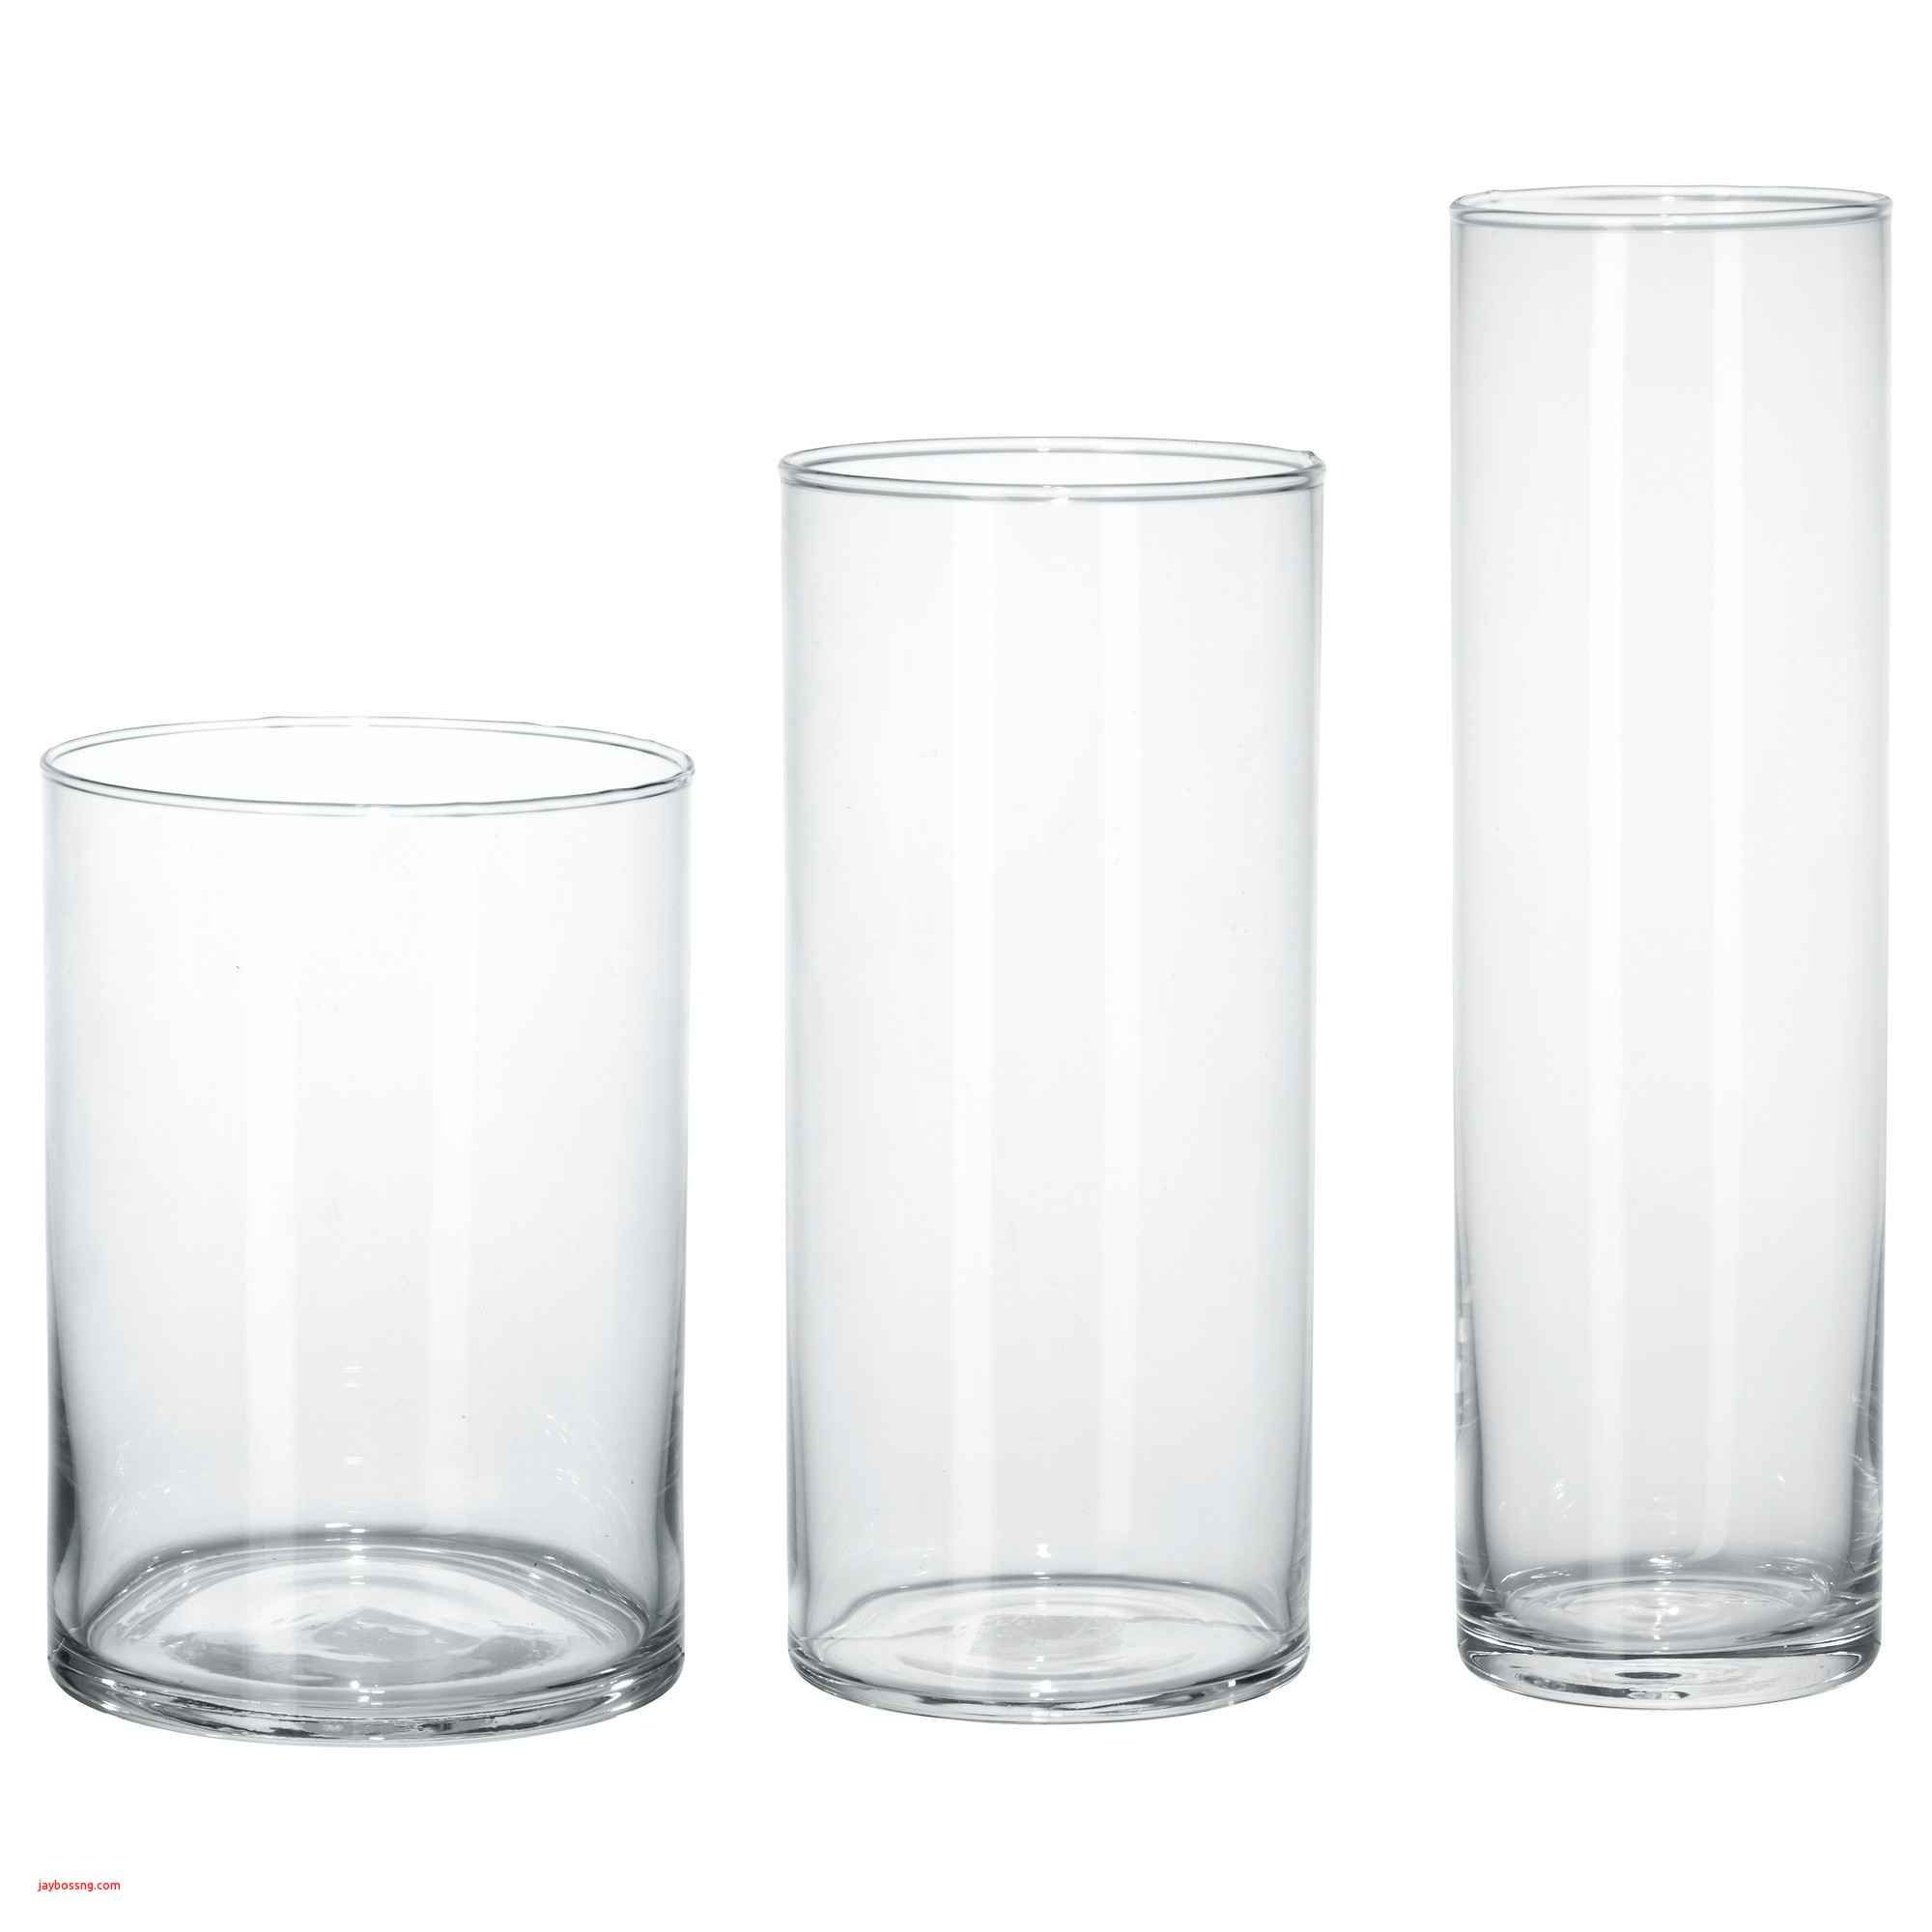 26 Stylish 6 X 20 Cylinder Vase 2024 free download 6 x 20 cylinder vase of black cylinder vase inspirational ikea white table created pe s5h with regard to black cylinder vase inspirational ikea white table created pe s5h vases ikea vase i 0